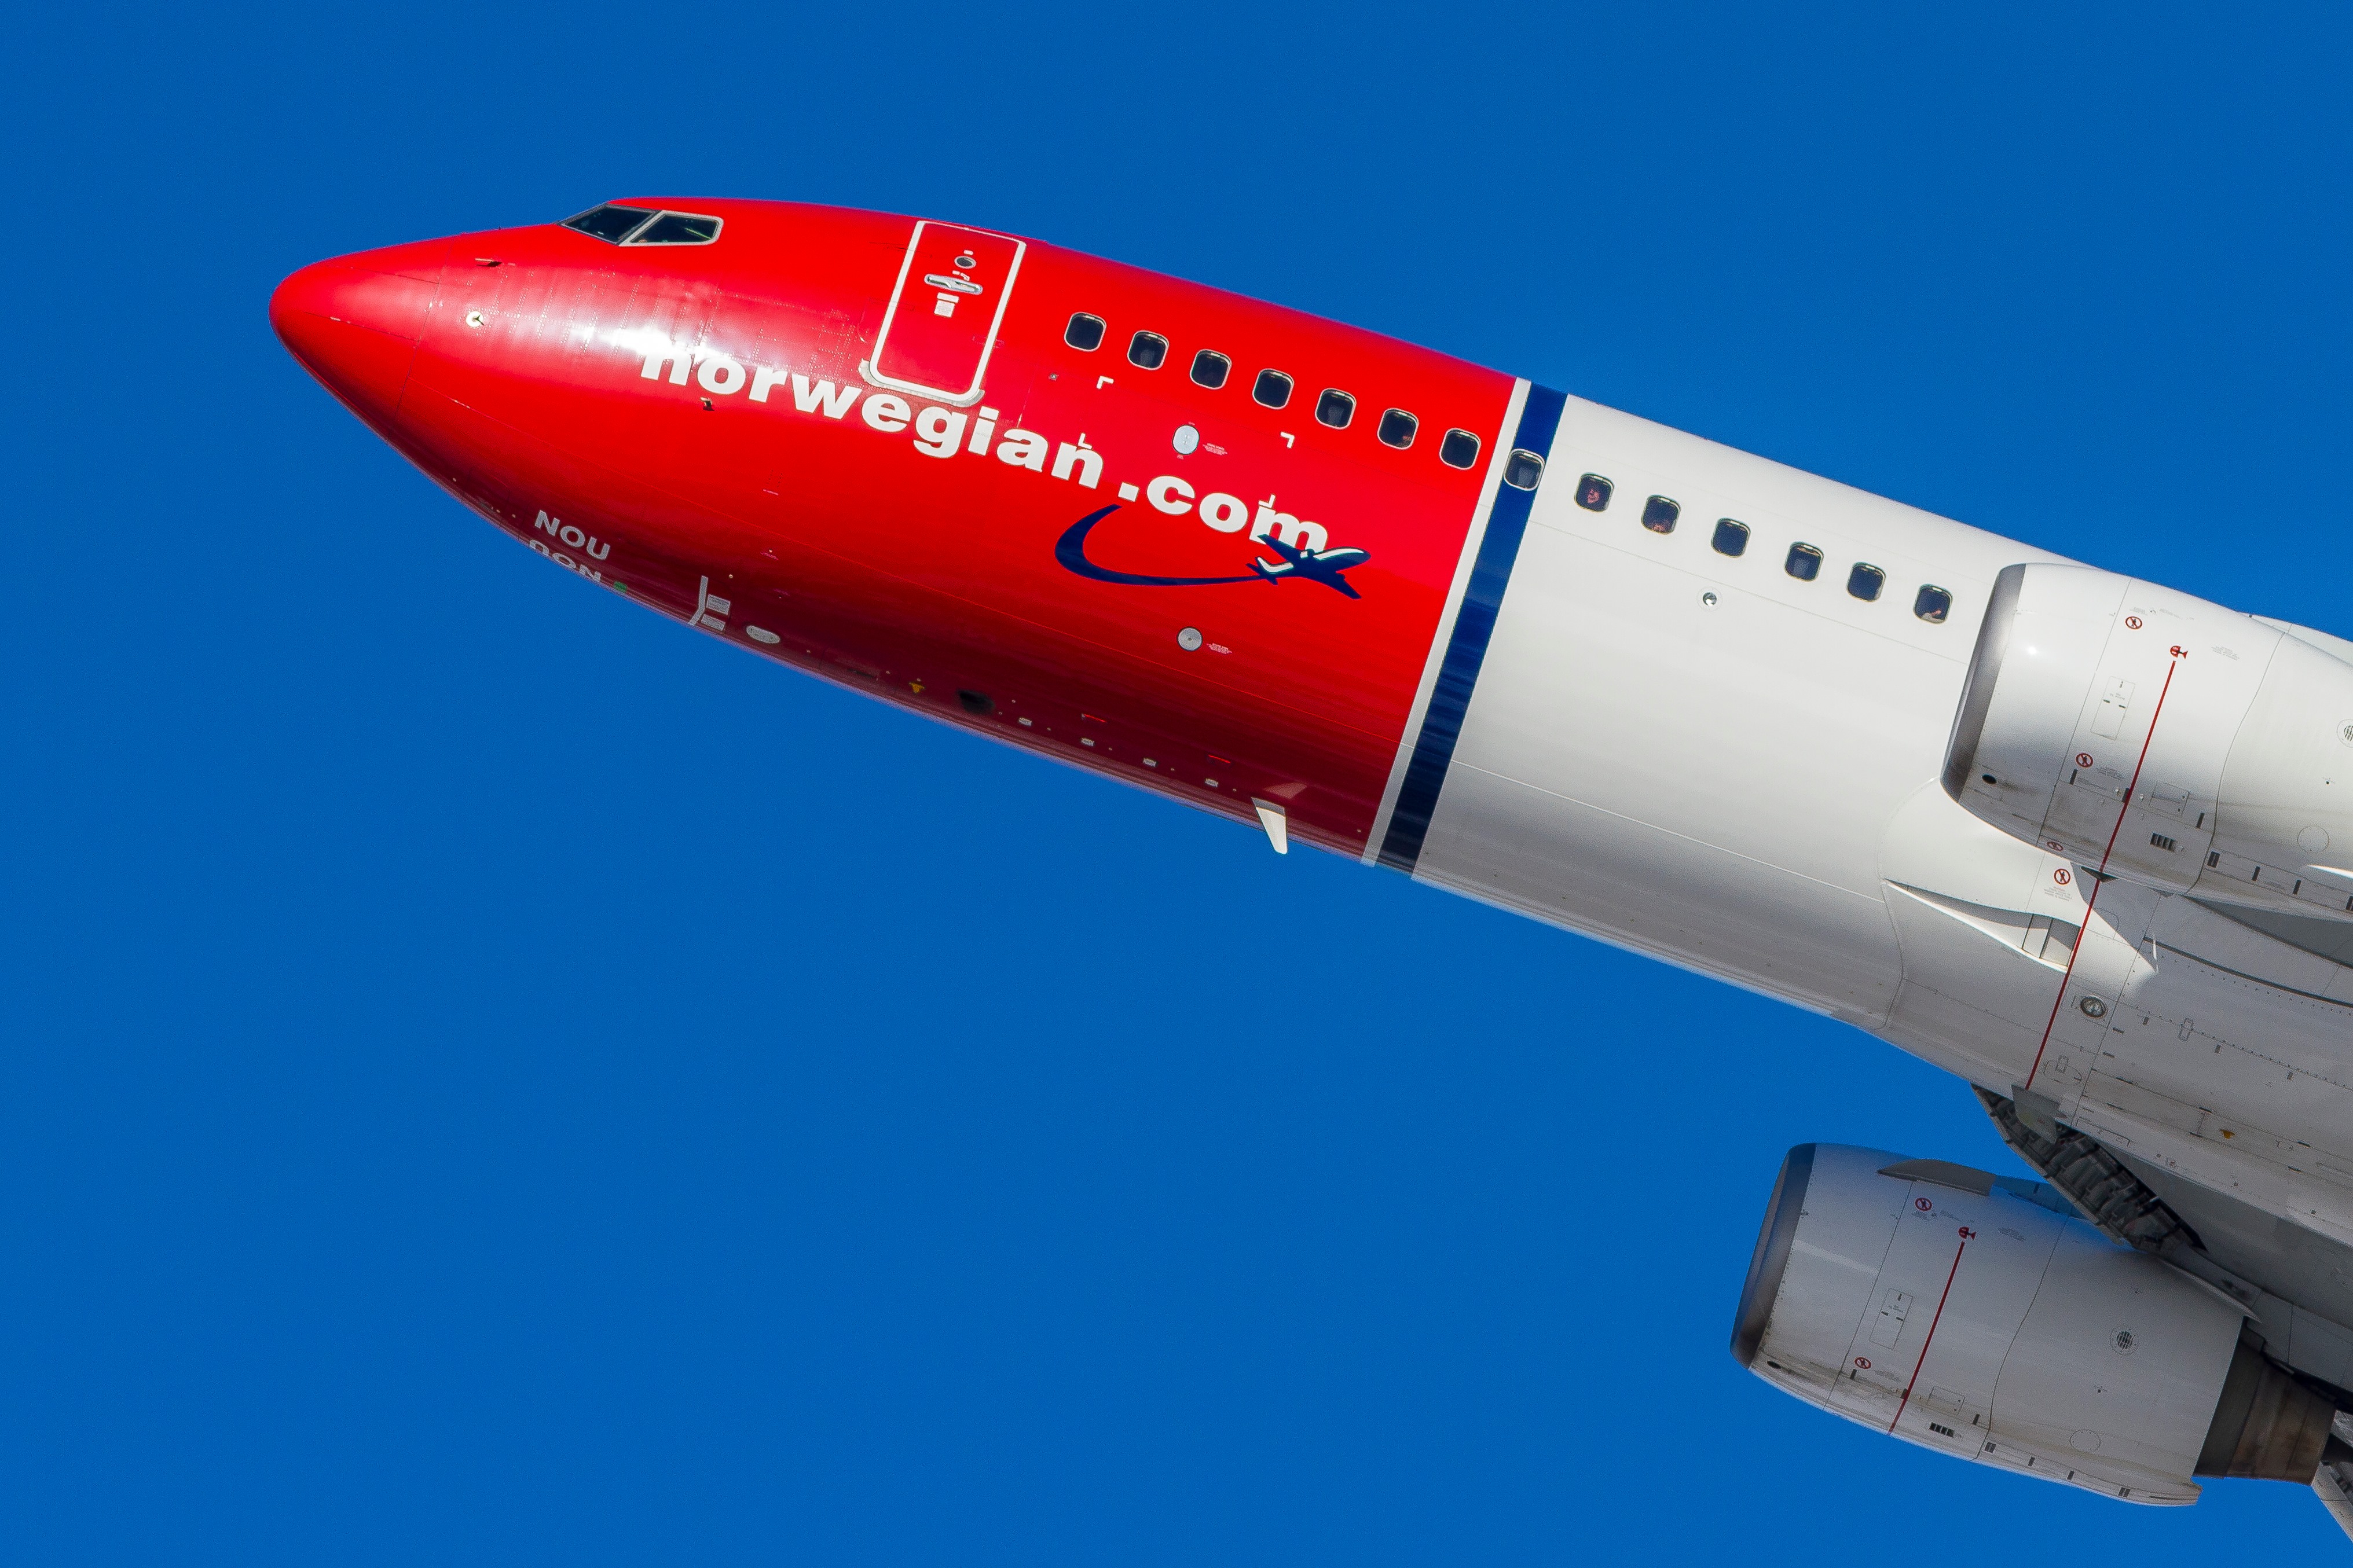 Norwegian to lease ten new Boeing 737 MAX 8 aircraft